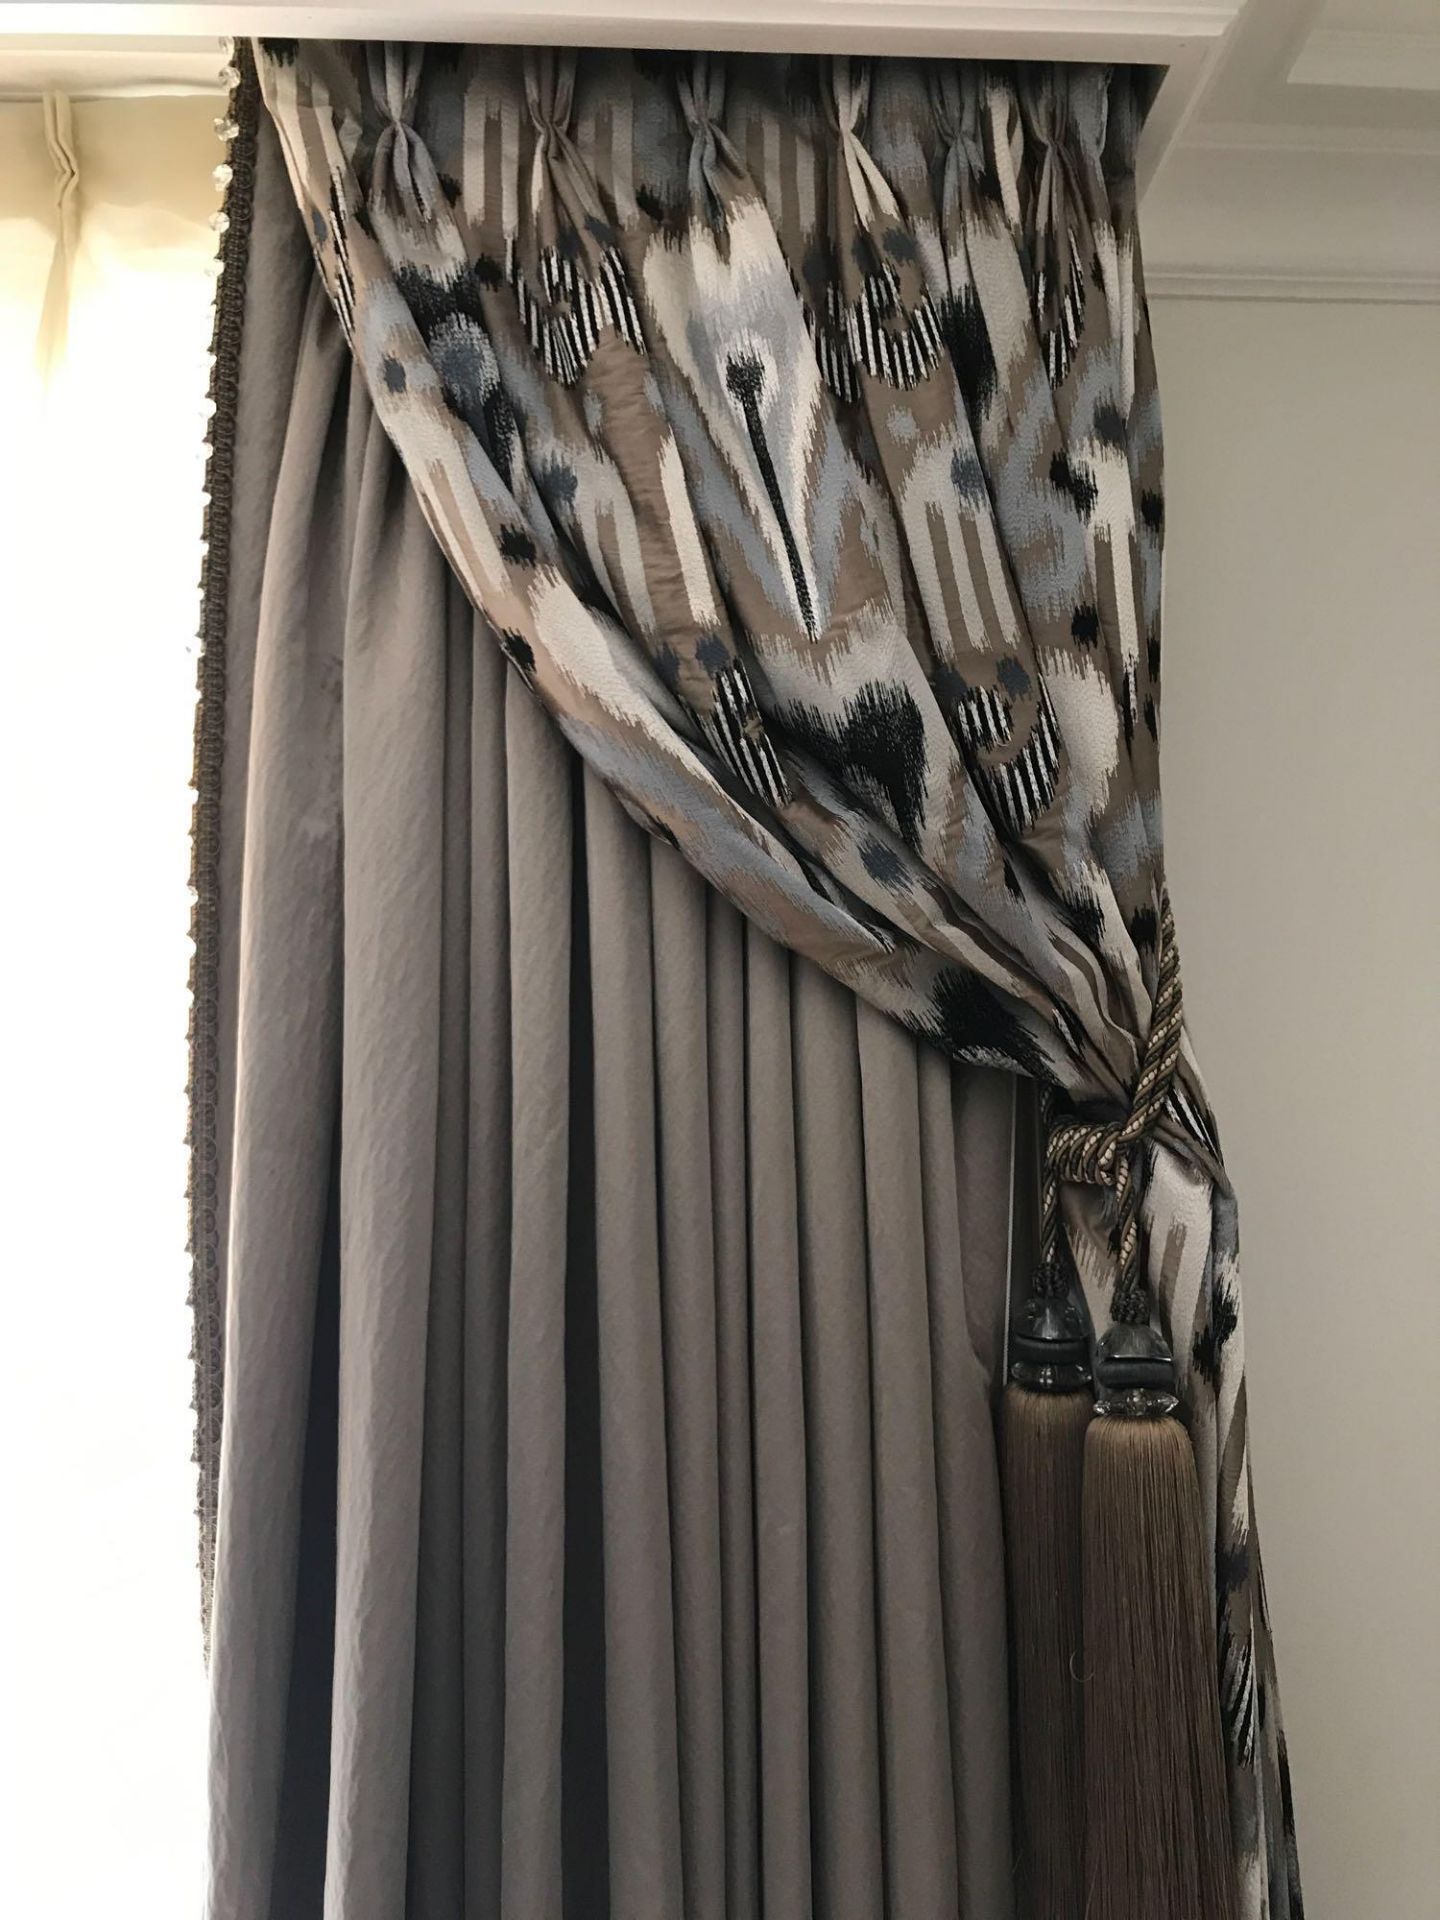 A Pair Of Silk Drapes And Jabots Patterned Green 250 x 240cm Room 604 - Image 2 of 2